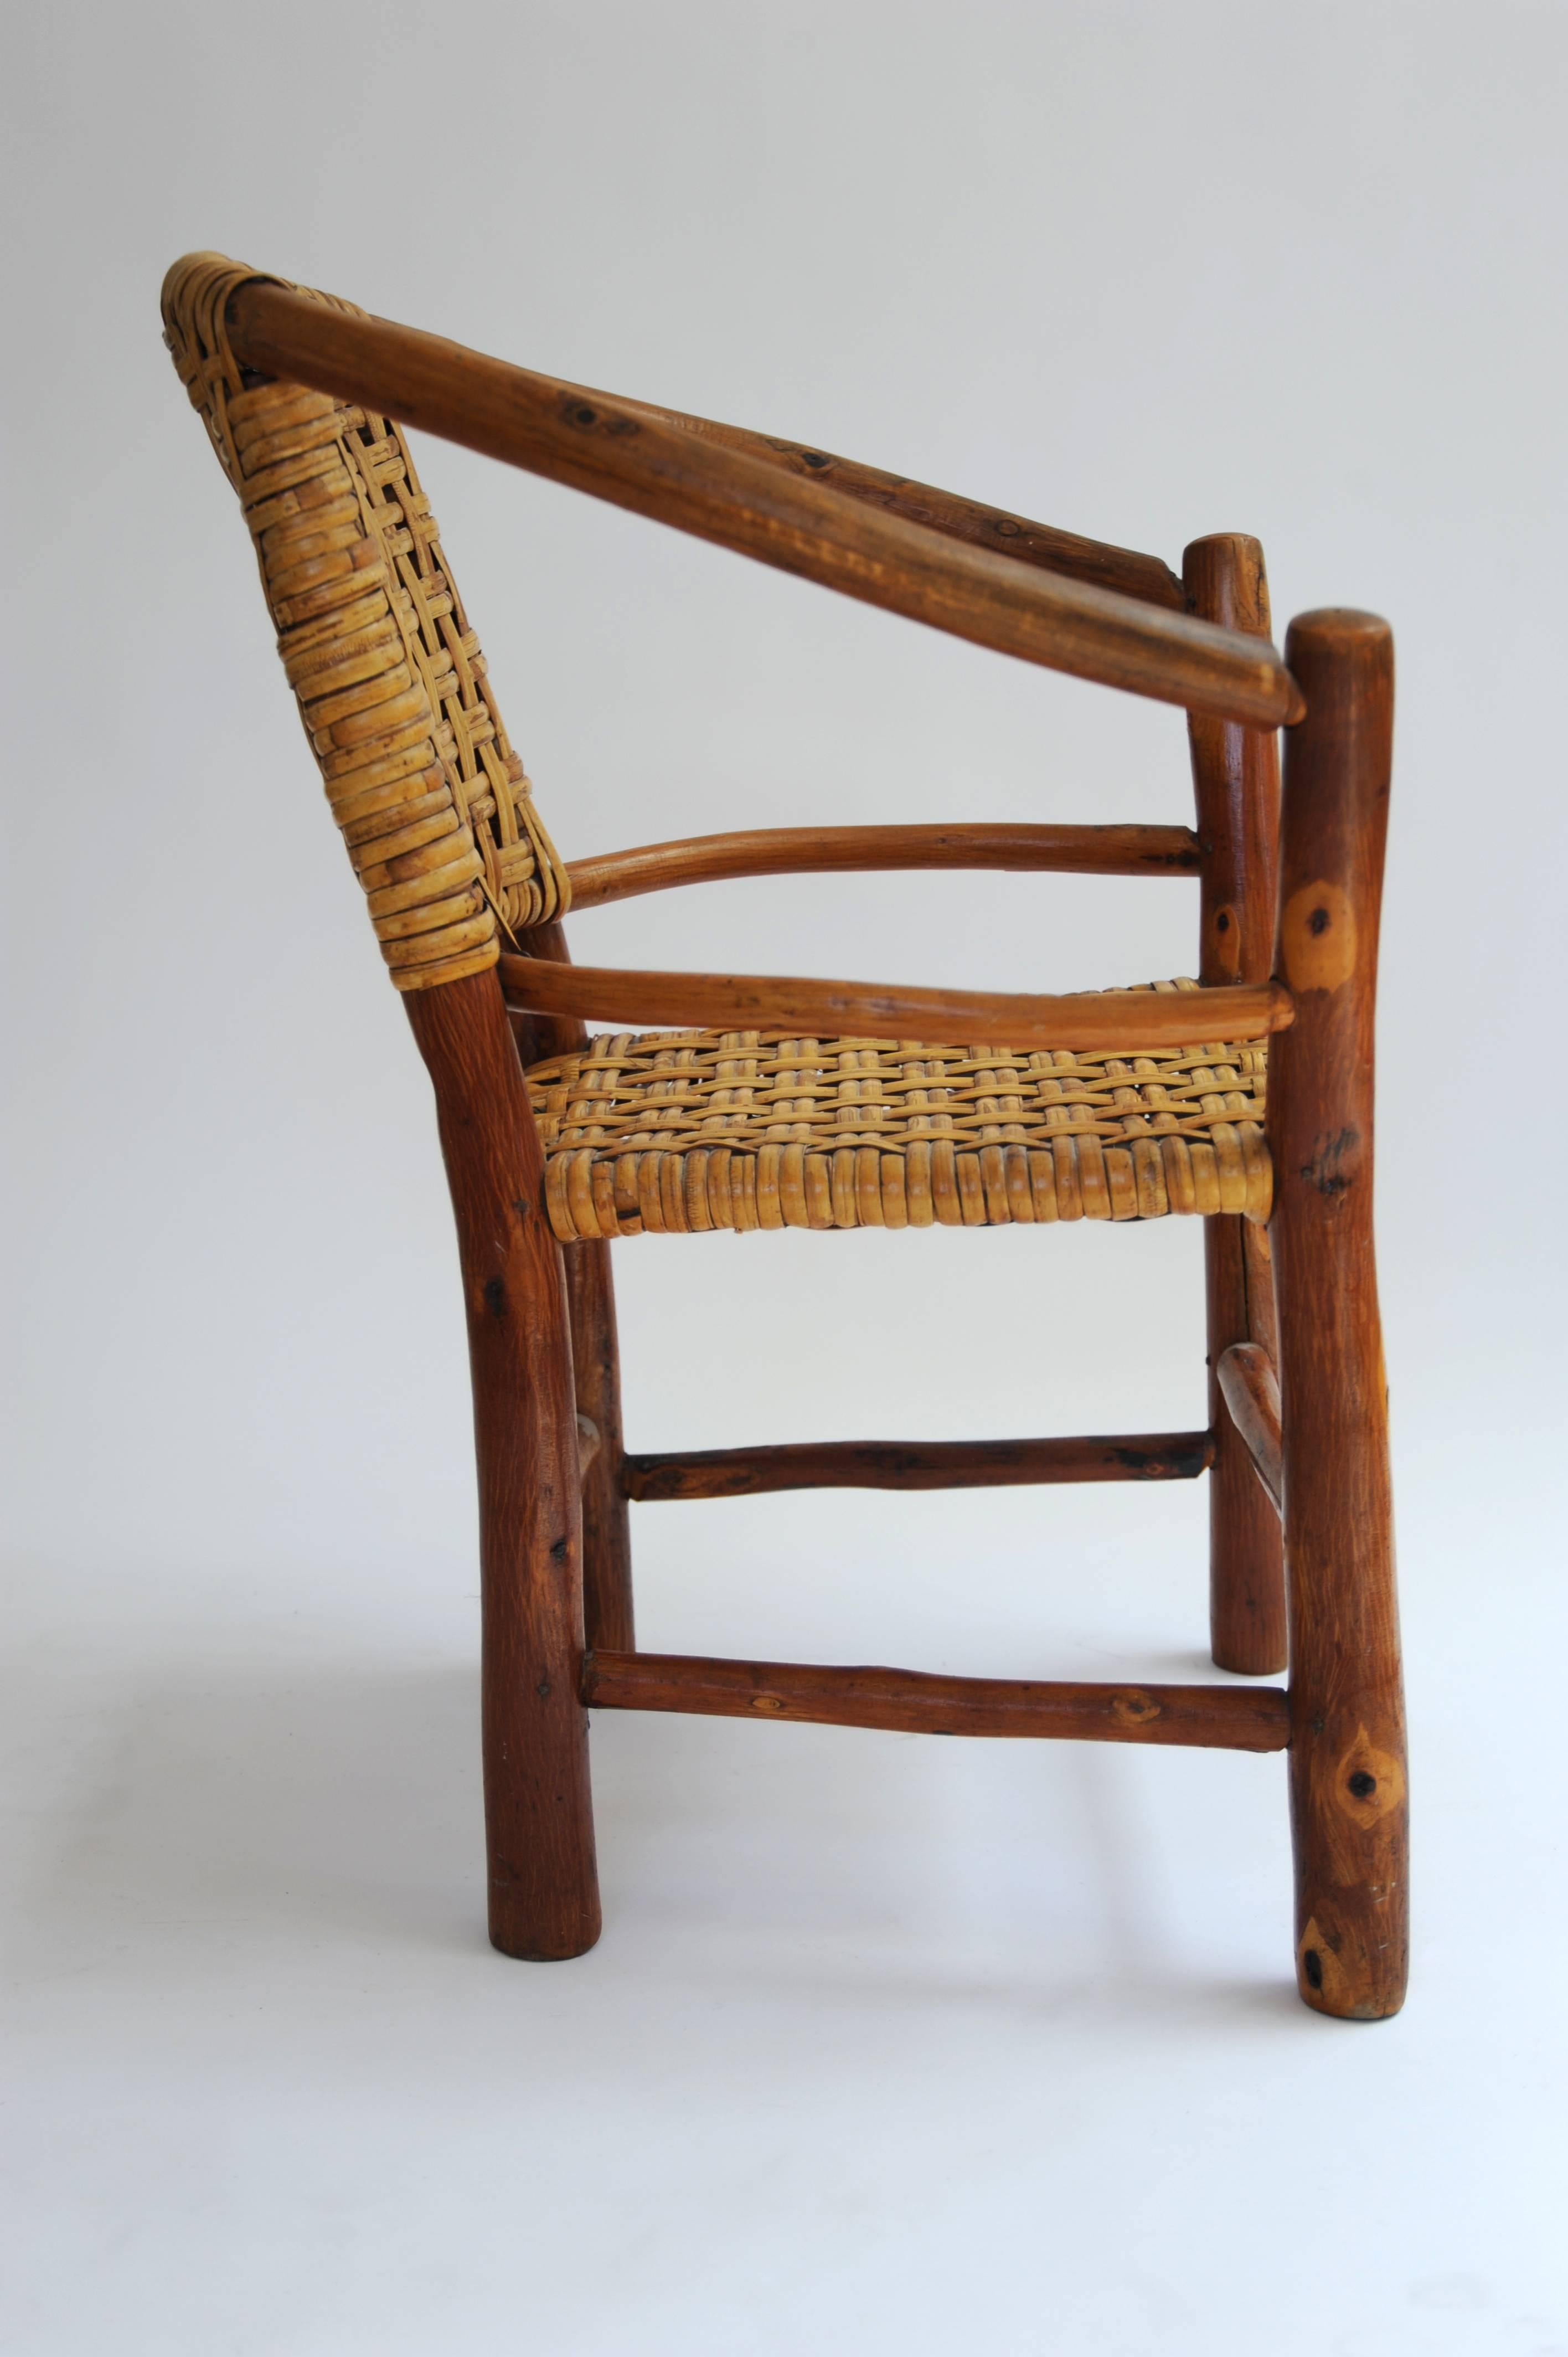 Unknown,

USA, 1935-1945.

Thick-woven rattan, natural molded 